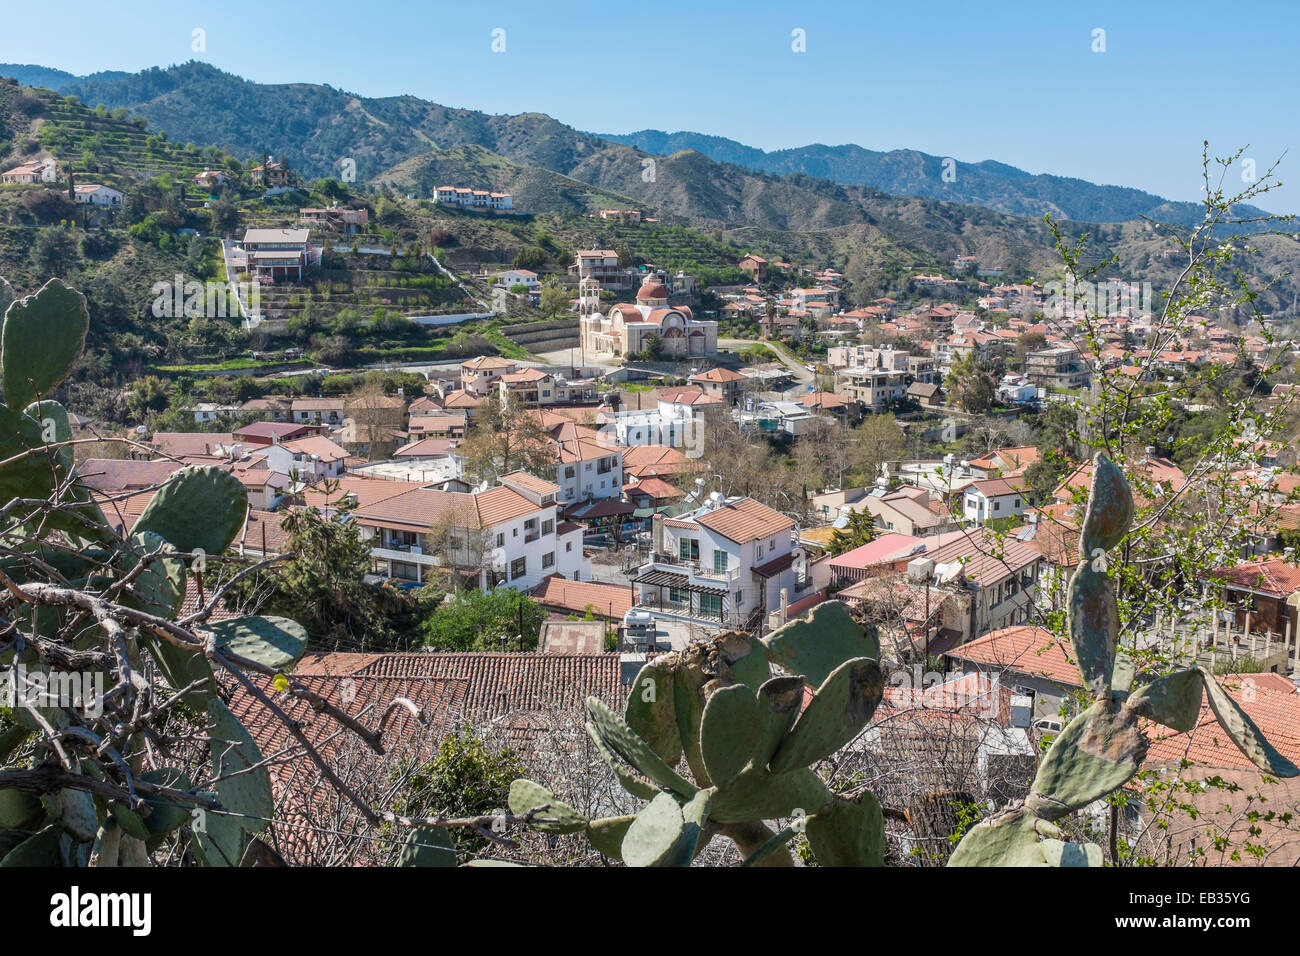 The village of Galata in the Troodos Mountains of central Cyprus, an island in the Mediterranean. Stock Photo